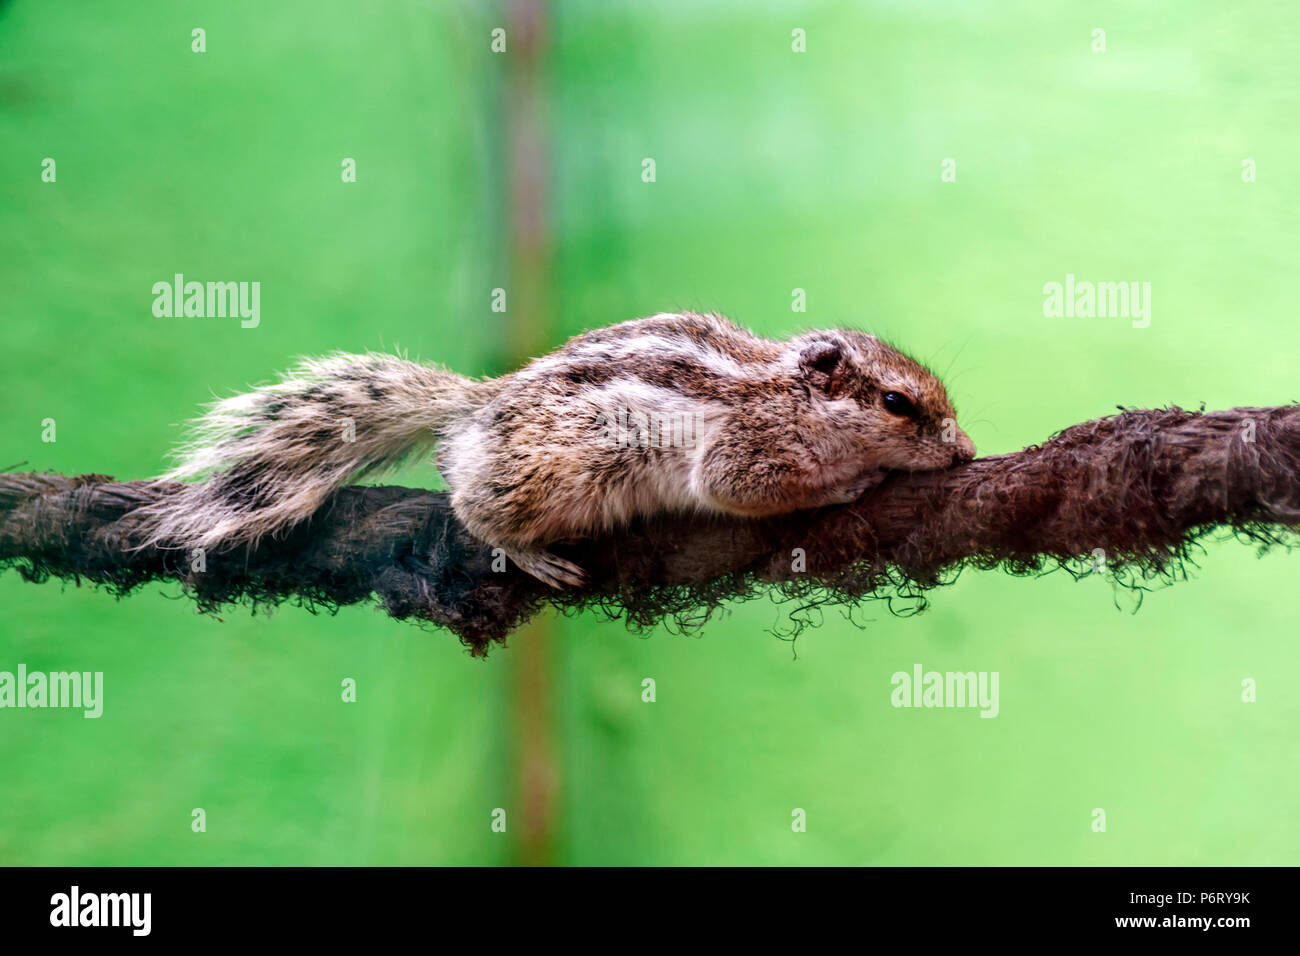 Chipmunk creeping on a tight rope on a single-tone background Stock Photo